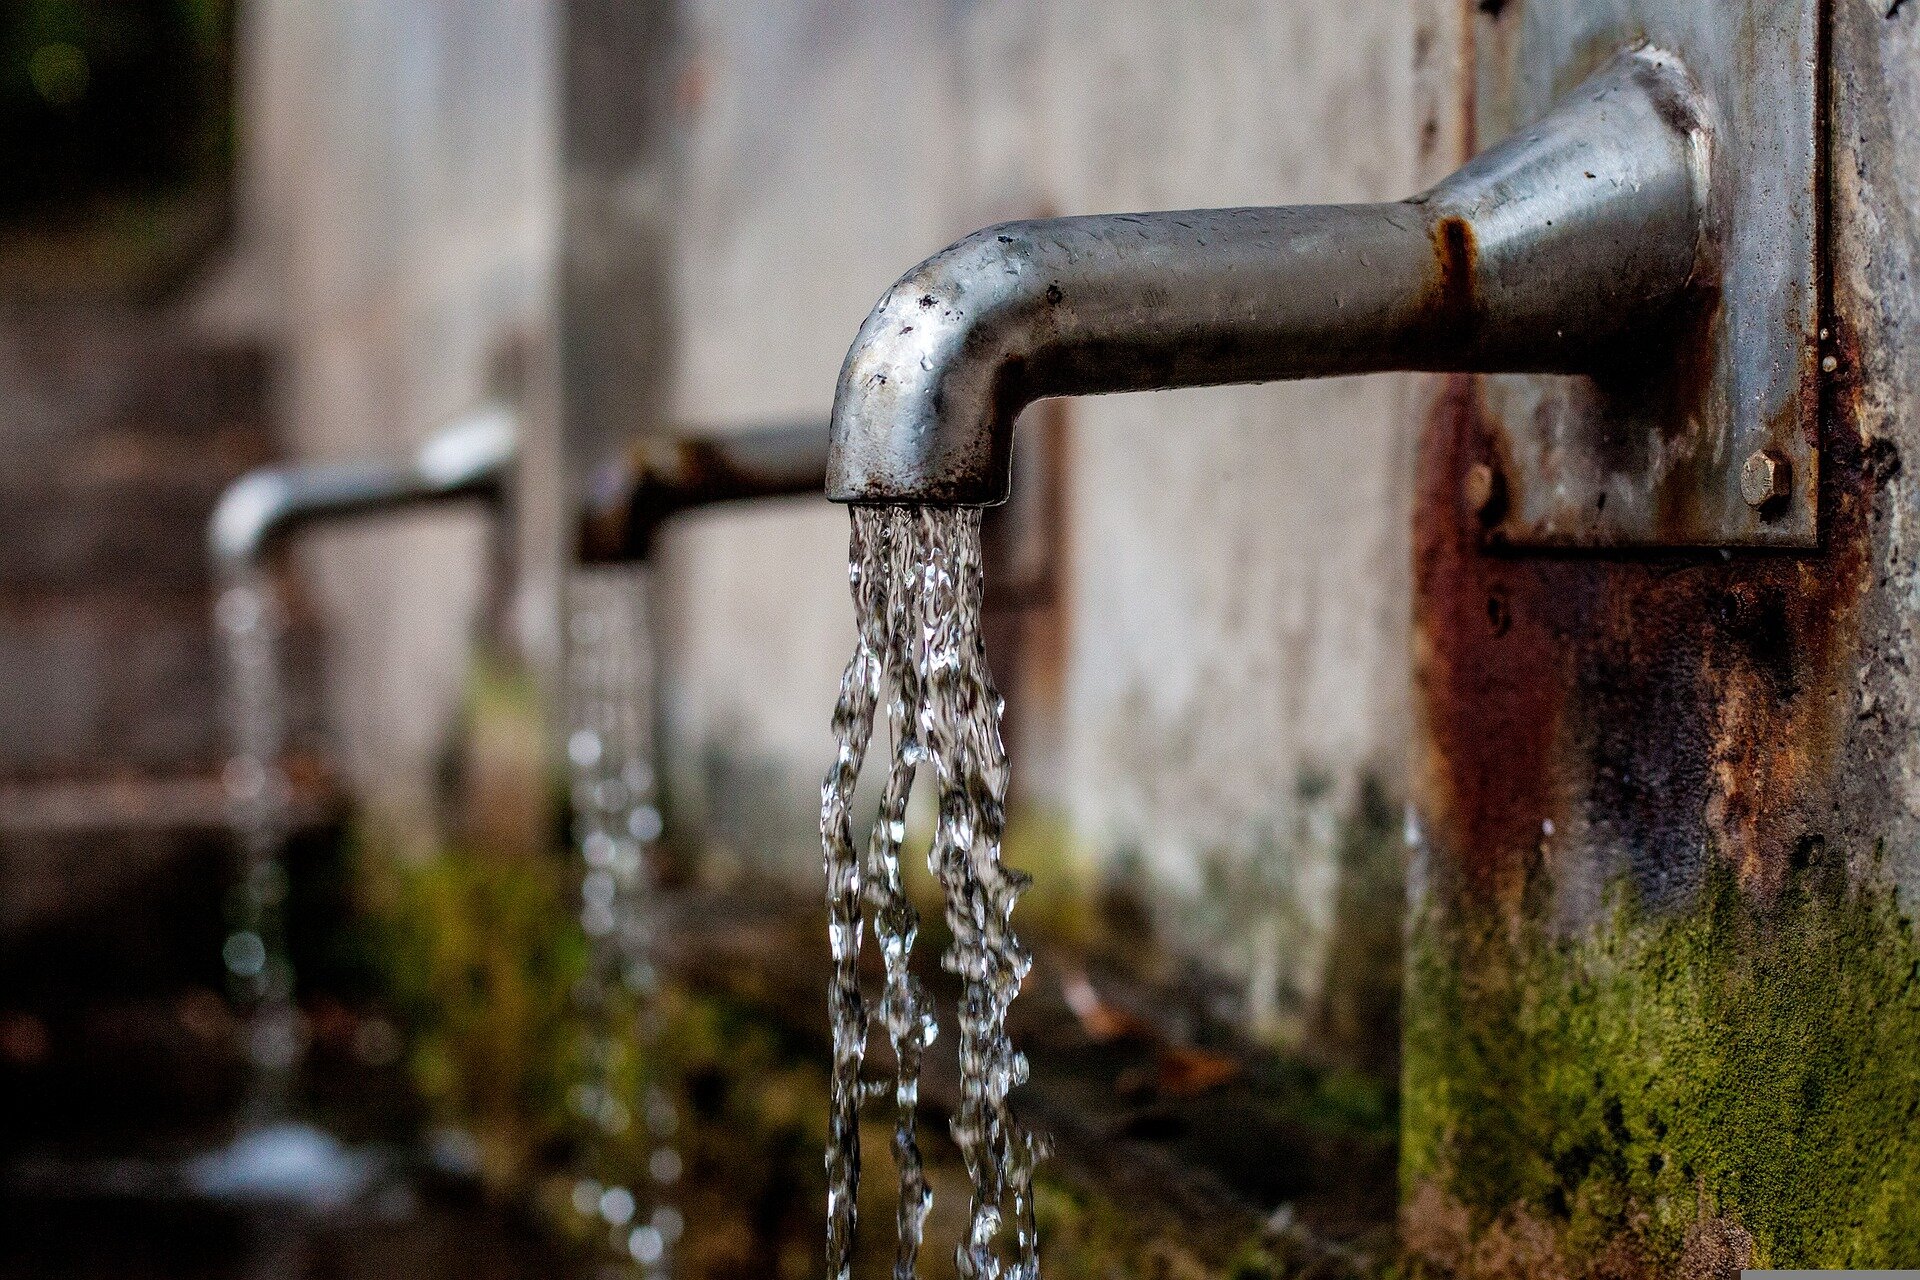 #EPA mandates states report on cyber threats to water systems